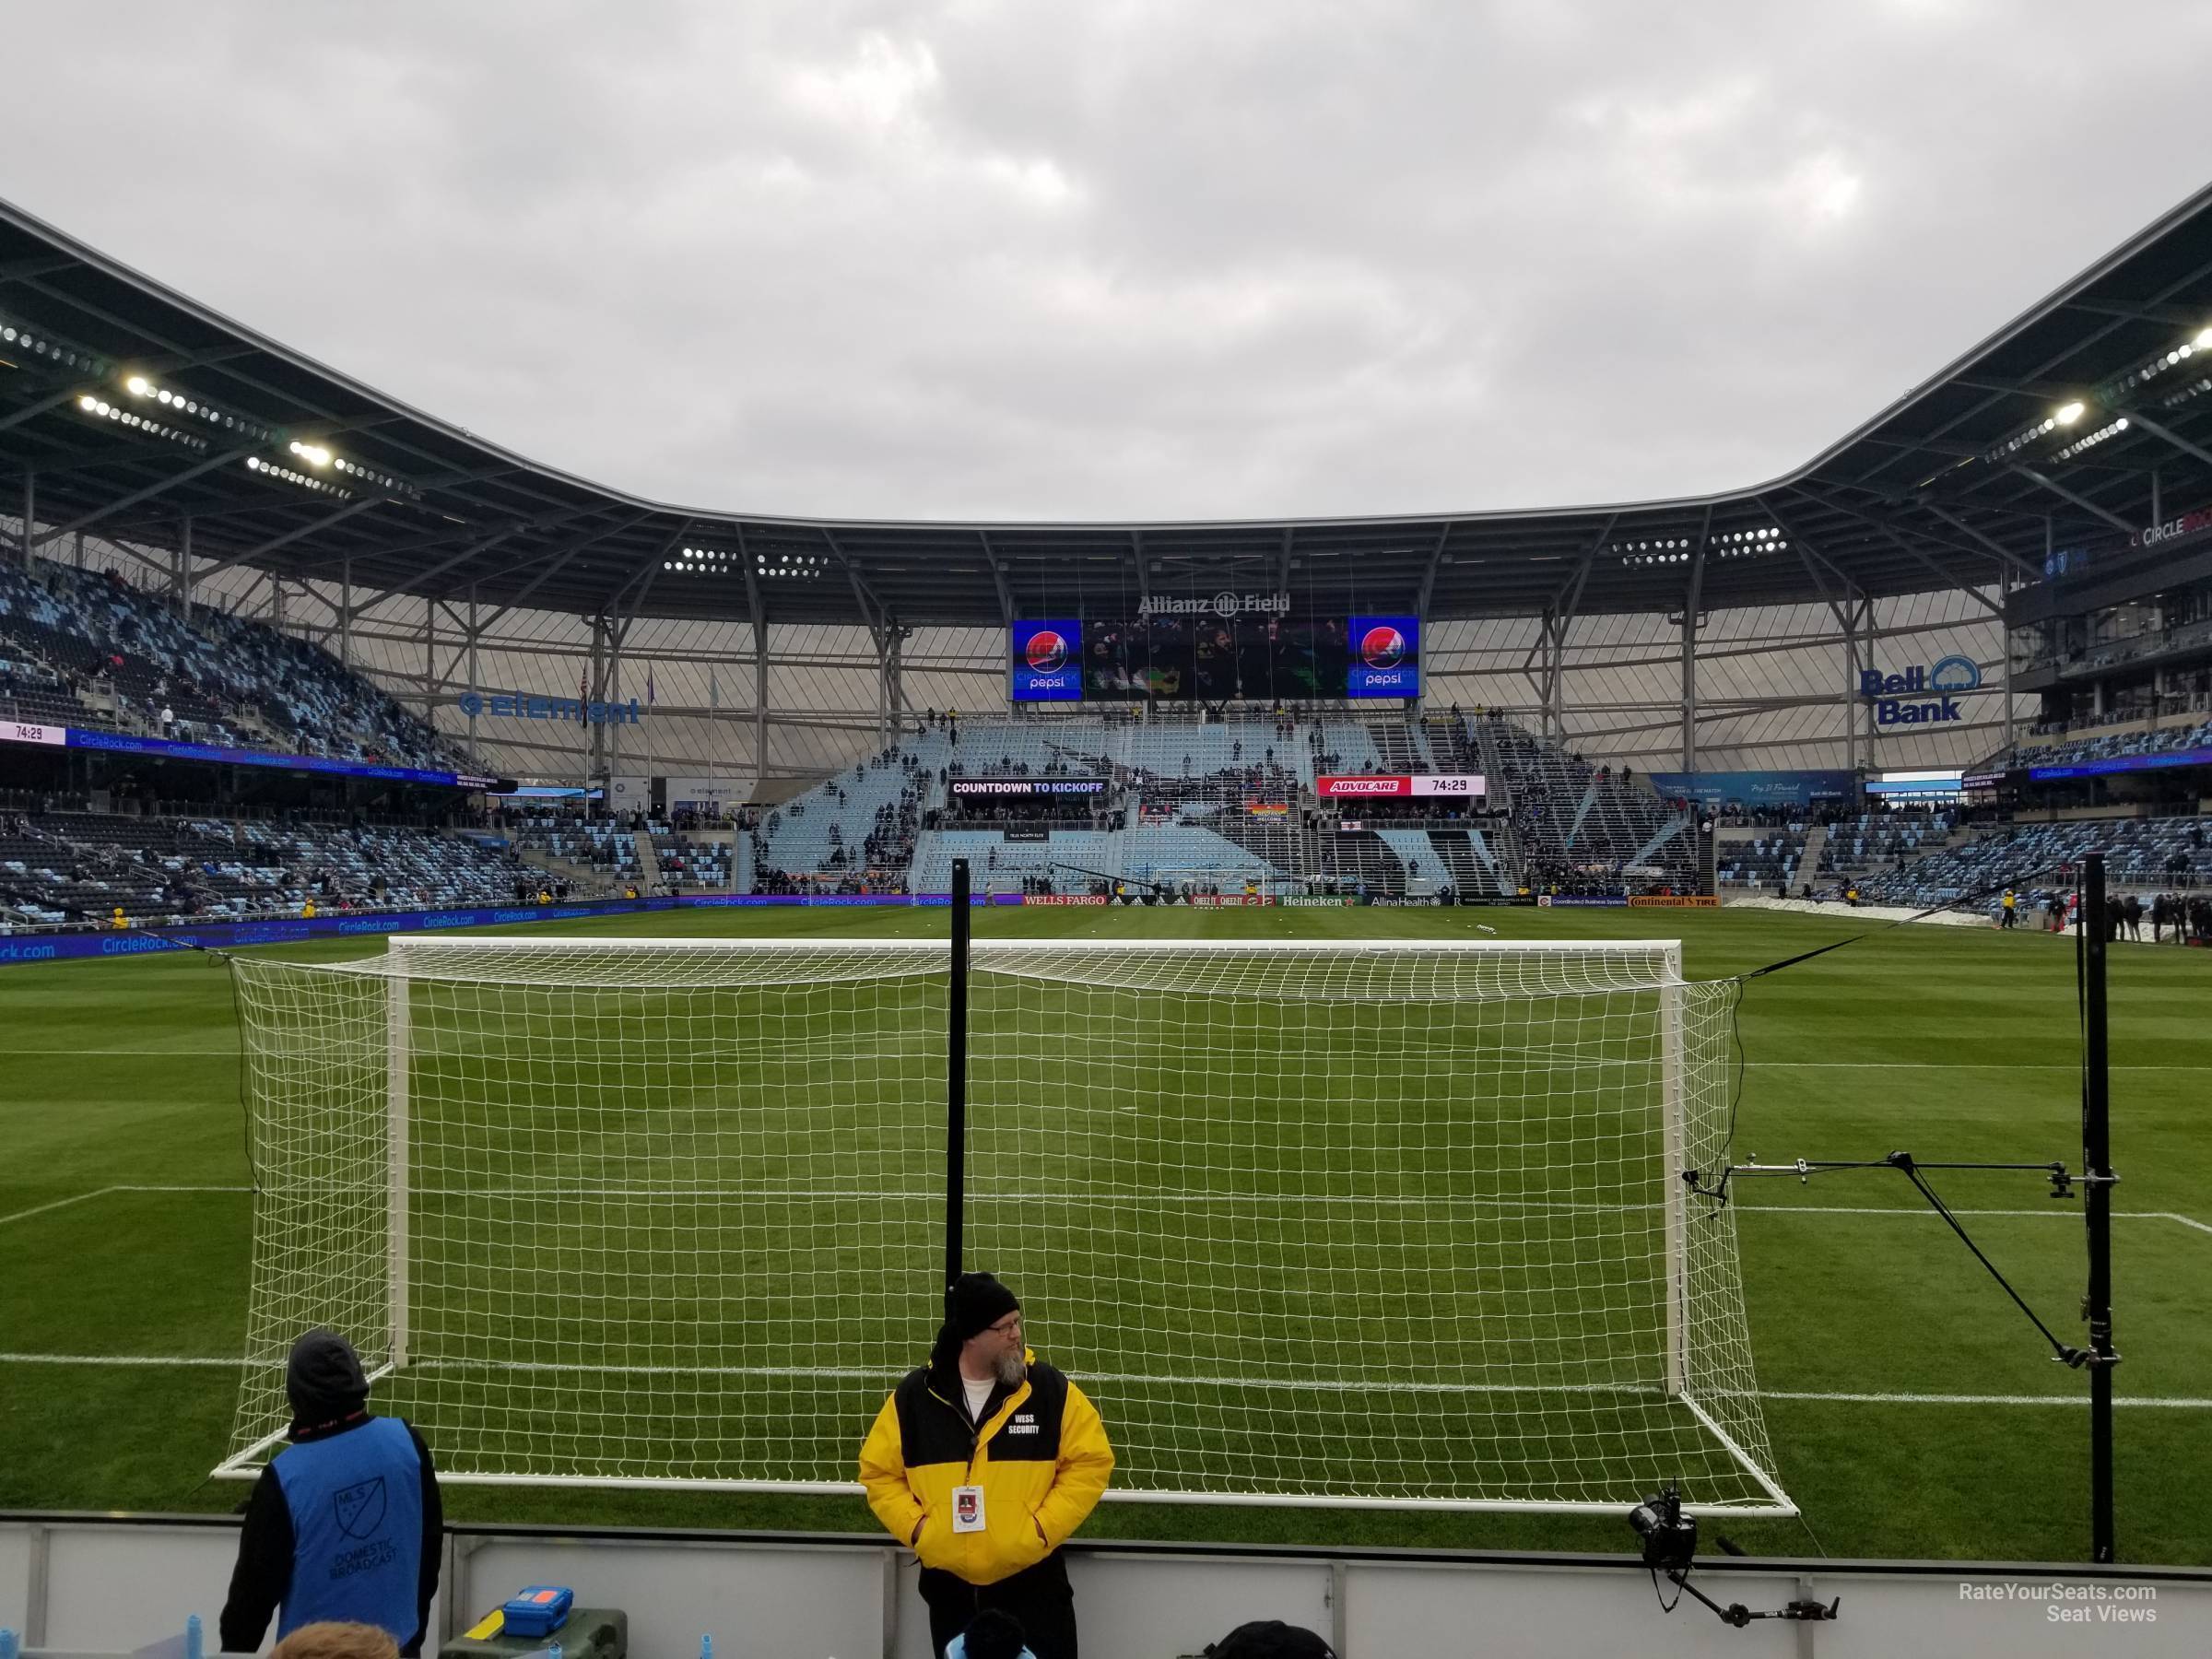 View from Section 4 Row 5 at Allianz Field